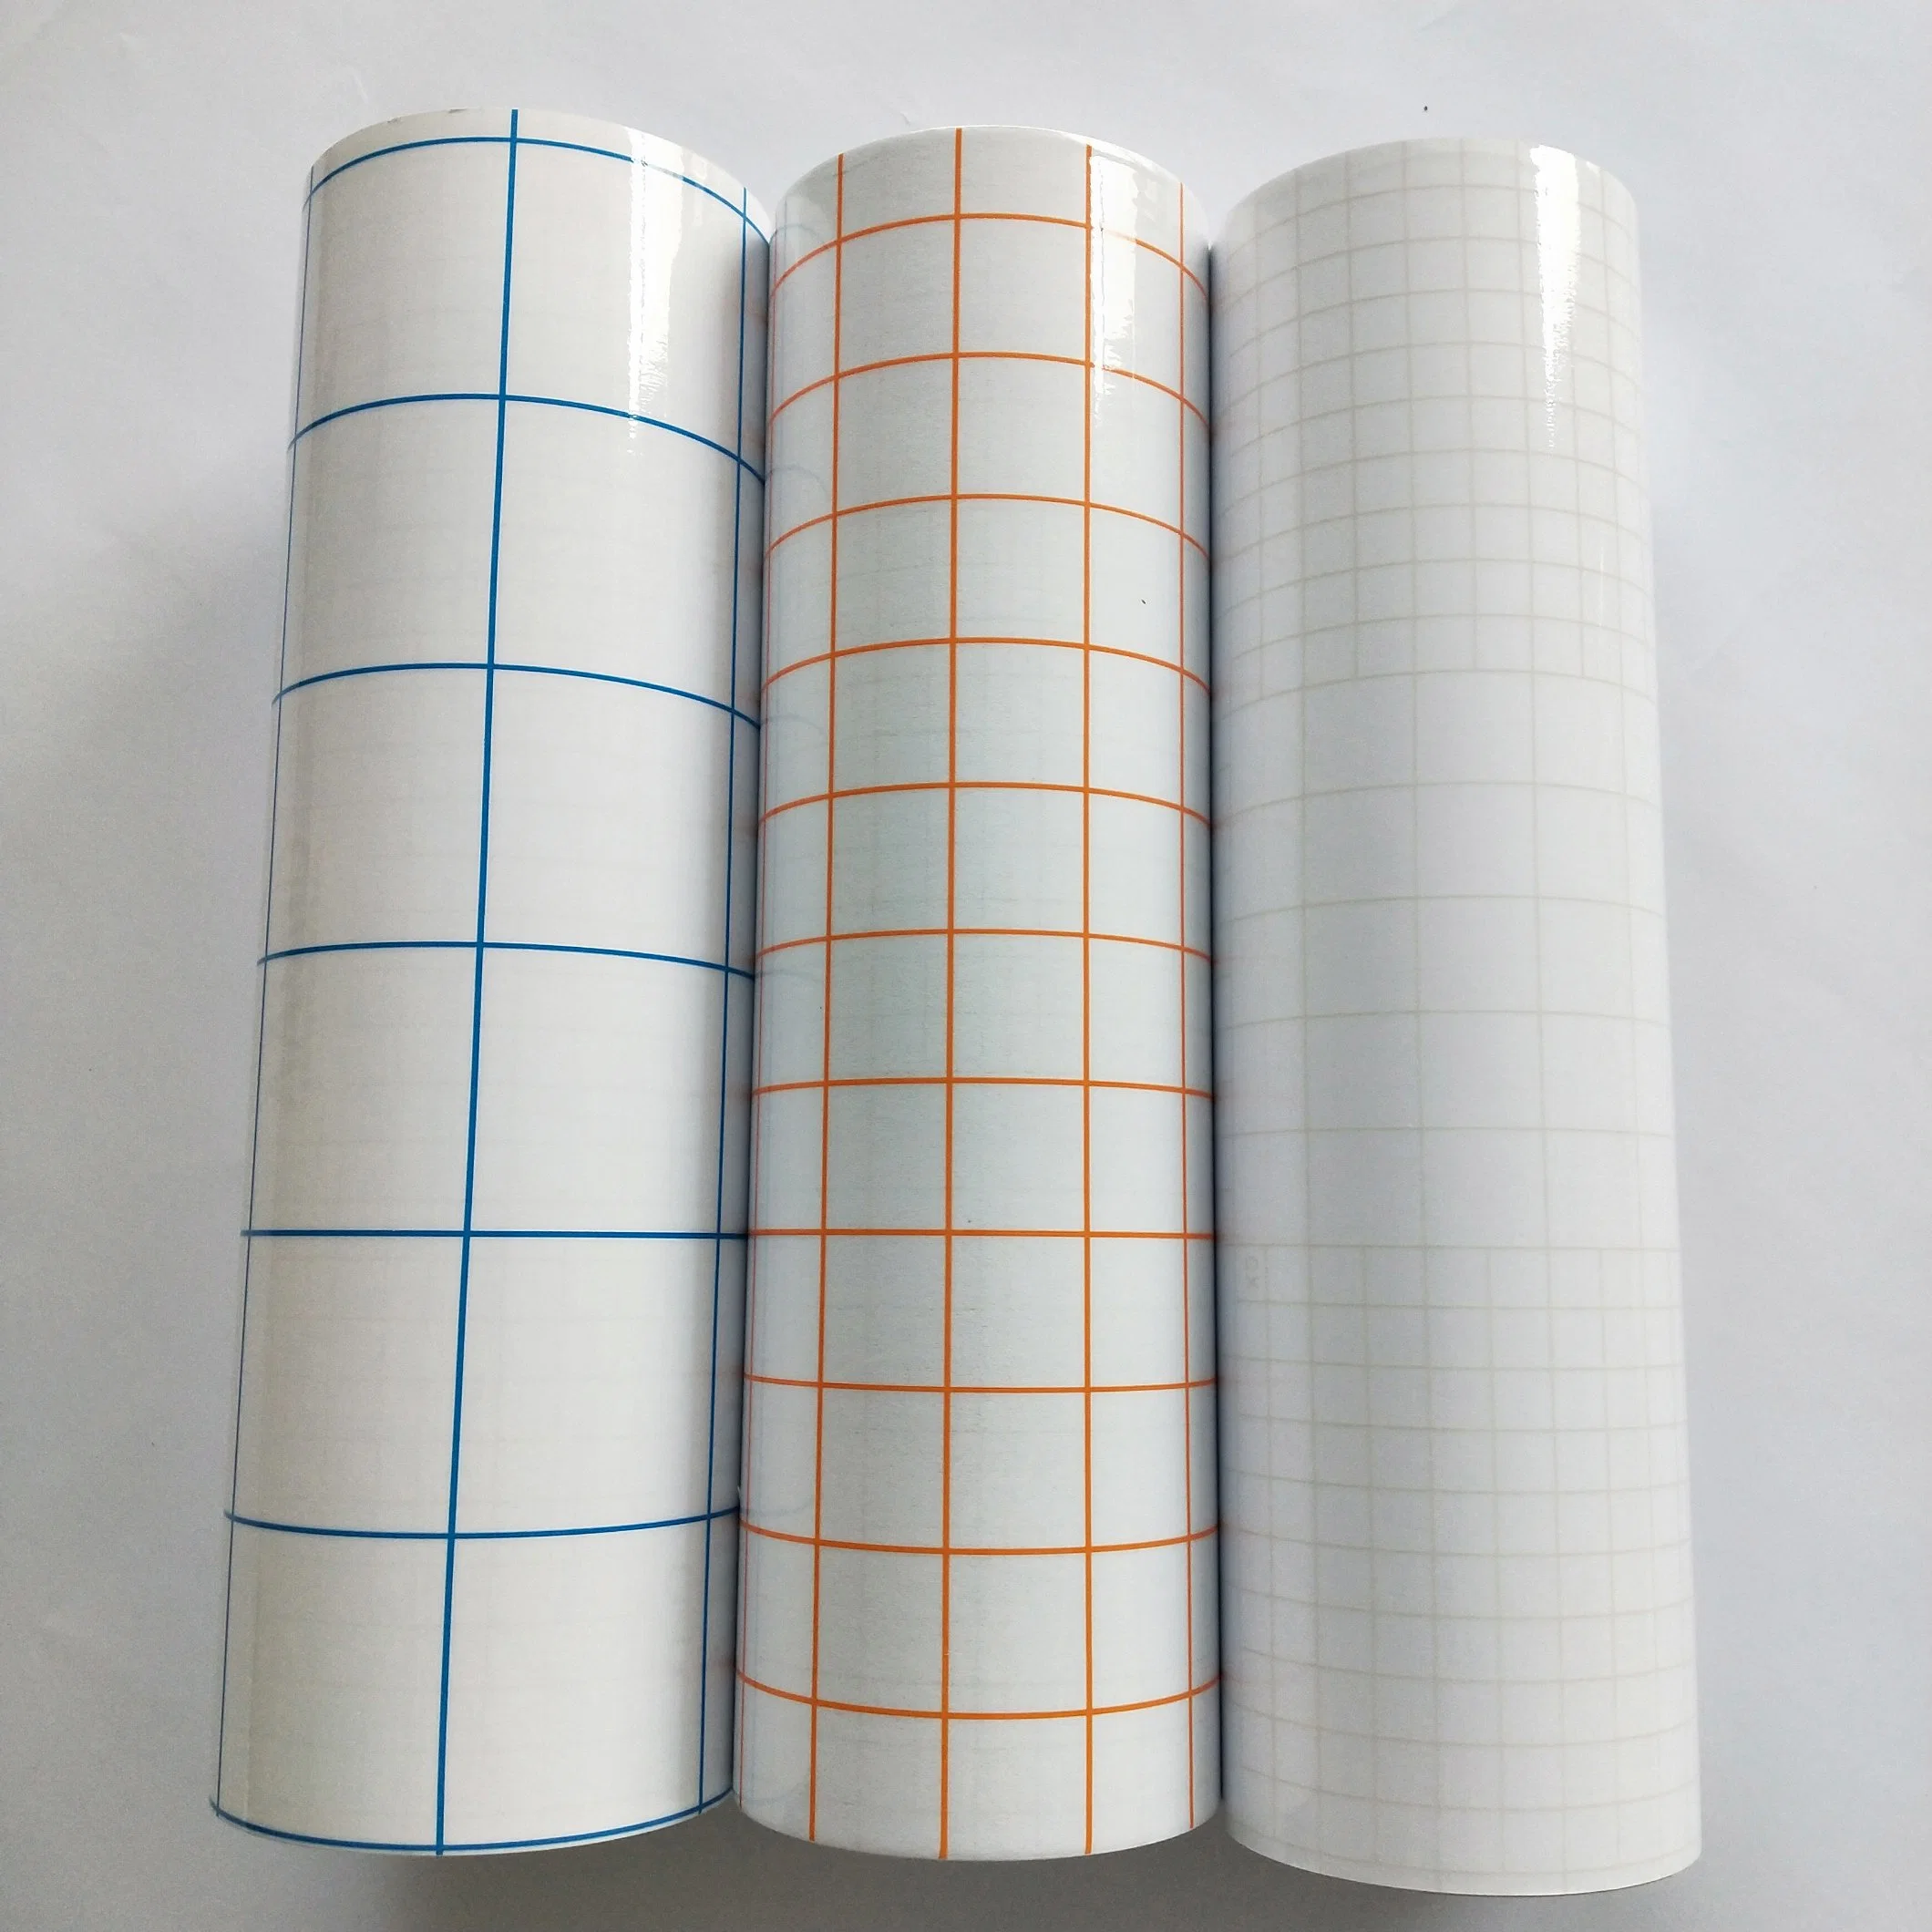 Anolly Factory Self Adhesive Grid Liner Transfer Film Transfer Tape High/Middle/Low Tack Glue Viny Transfer Tape Removable Glue Vinyl Film